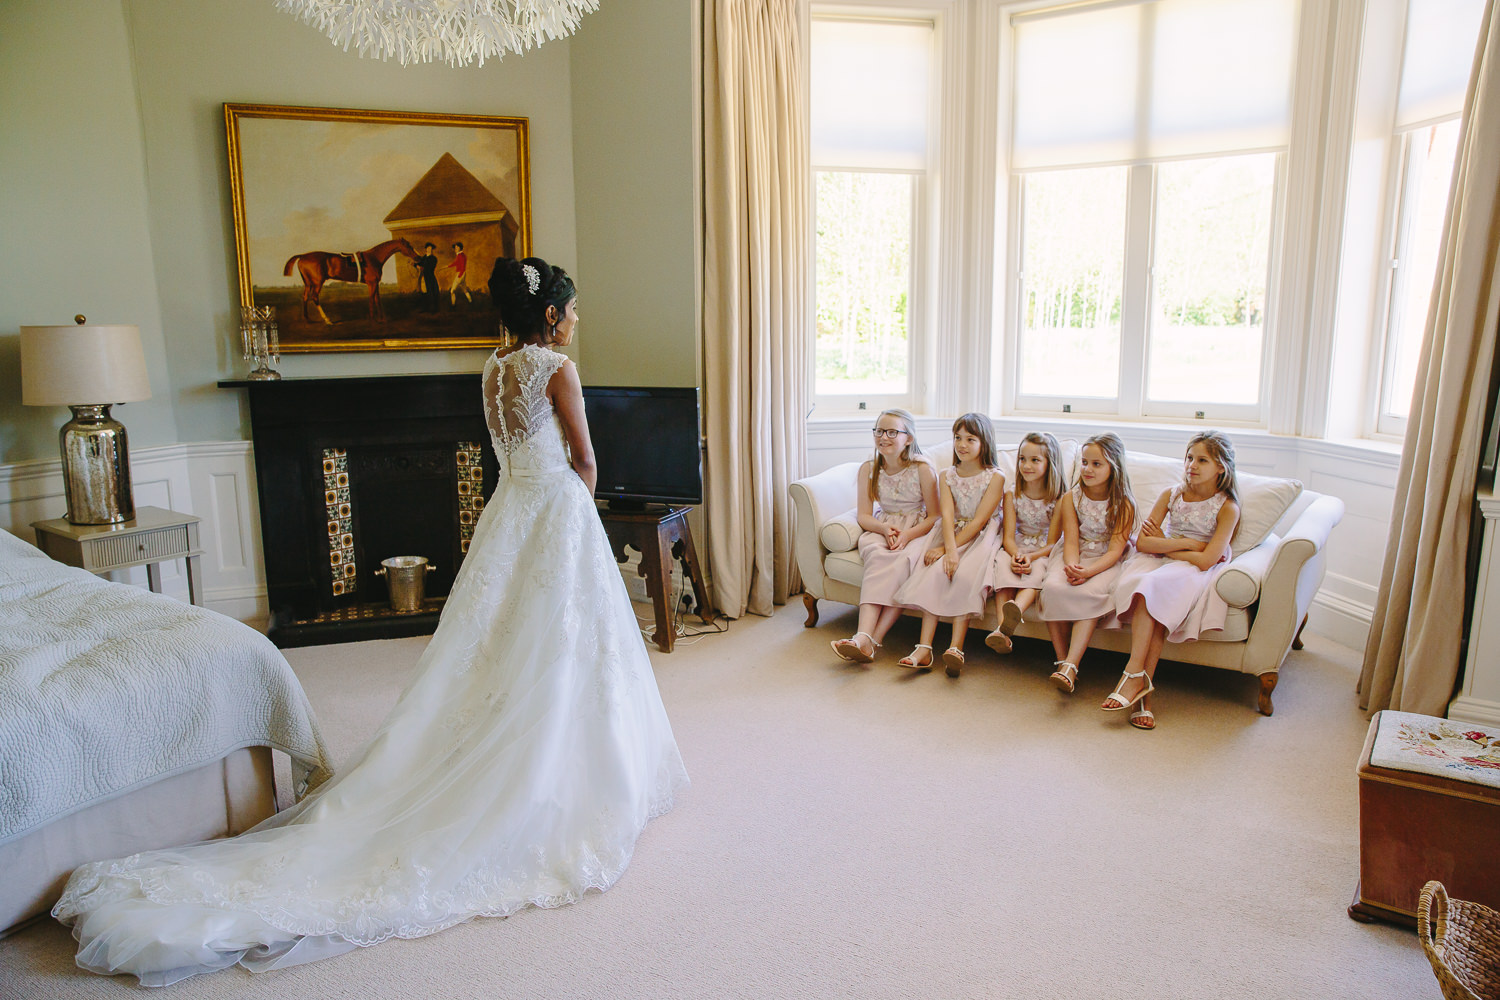 Bride standing in front of flower girls who are sitting in a row on a sofa